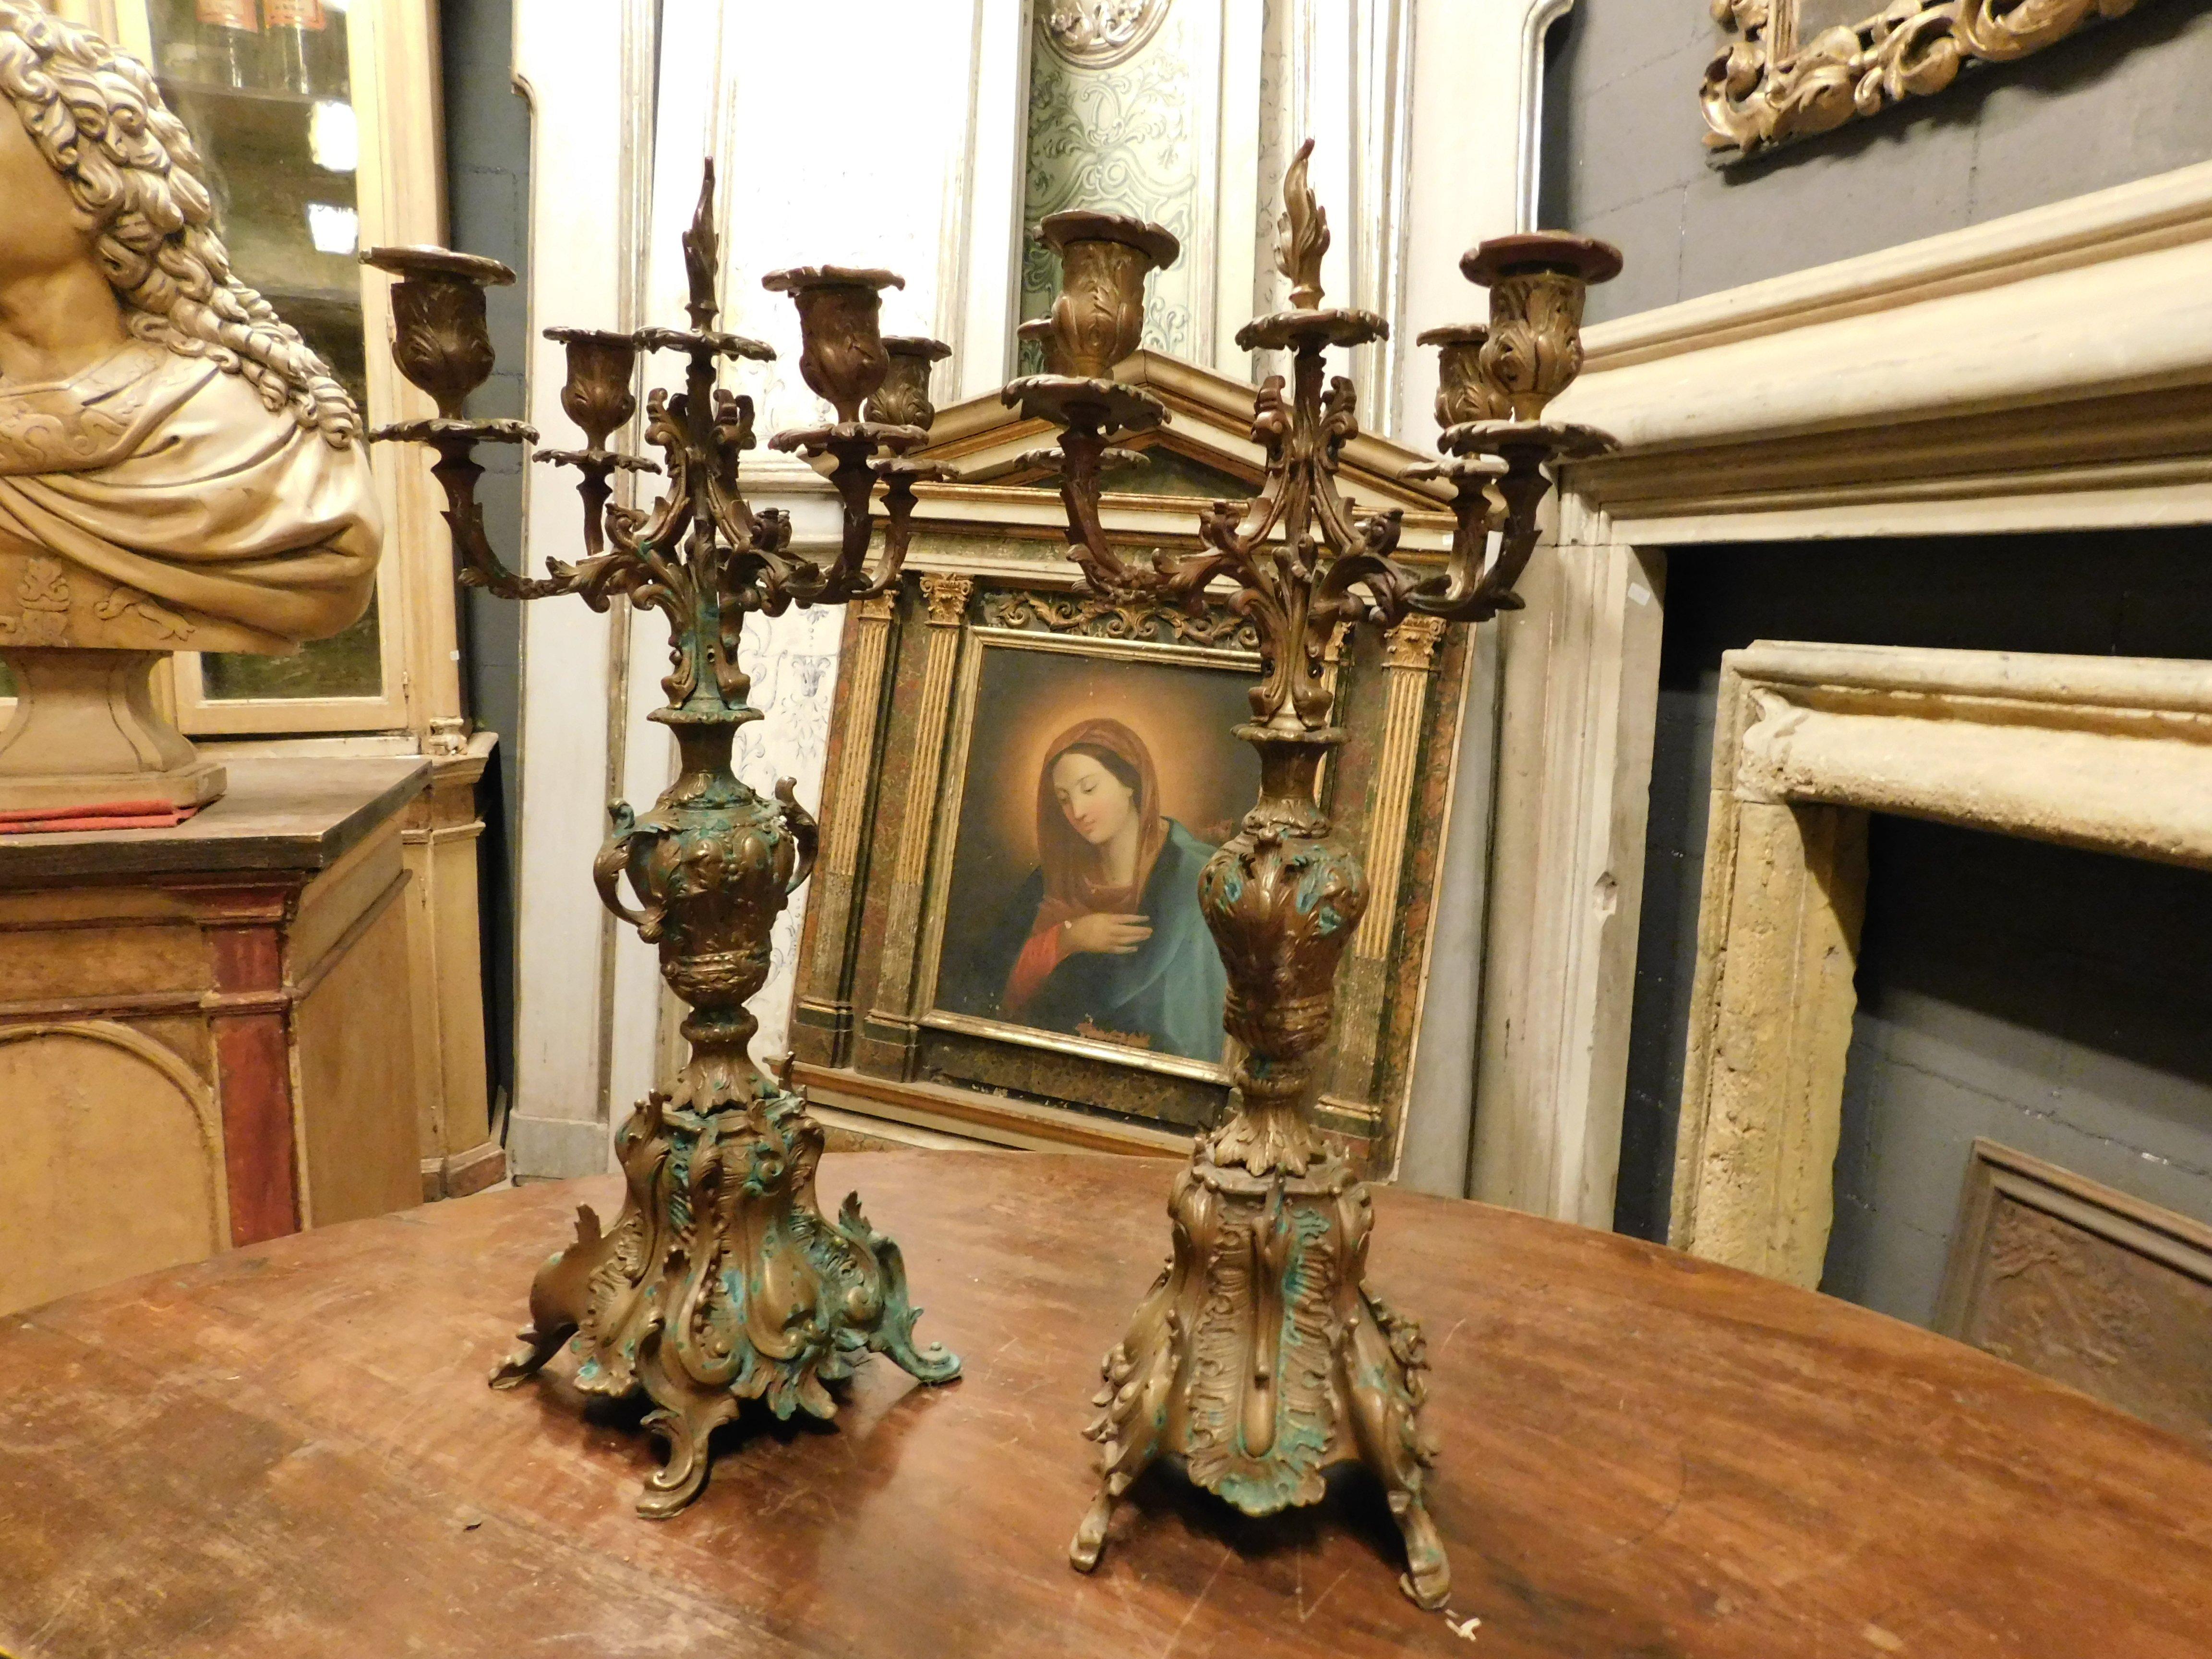 Ancient pair of gilded bronze candelabras richly carved with floral and baroque motifs, 4 candle holder arms each with a practical tip for moving objects, built to be placed above a fireplace in the 19th century in Italy, measuring W 27 x H 56 x cm